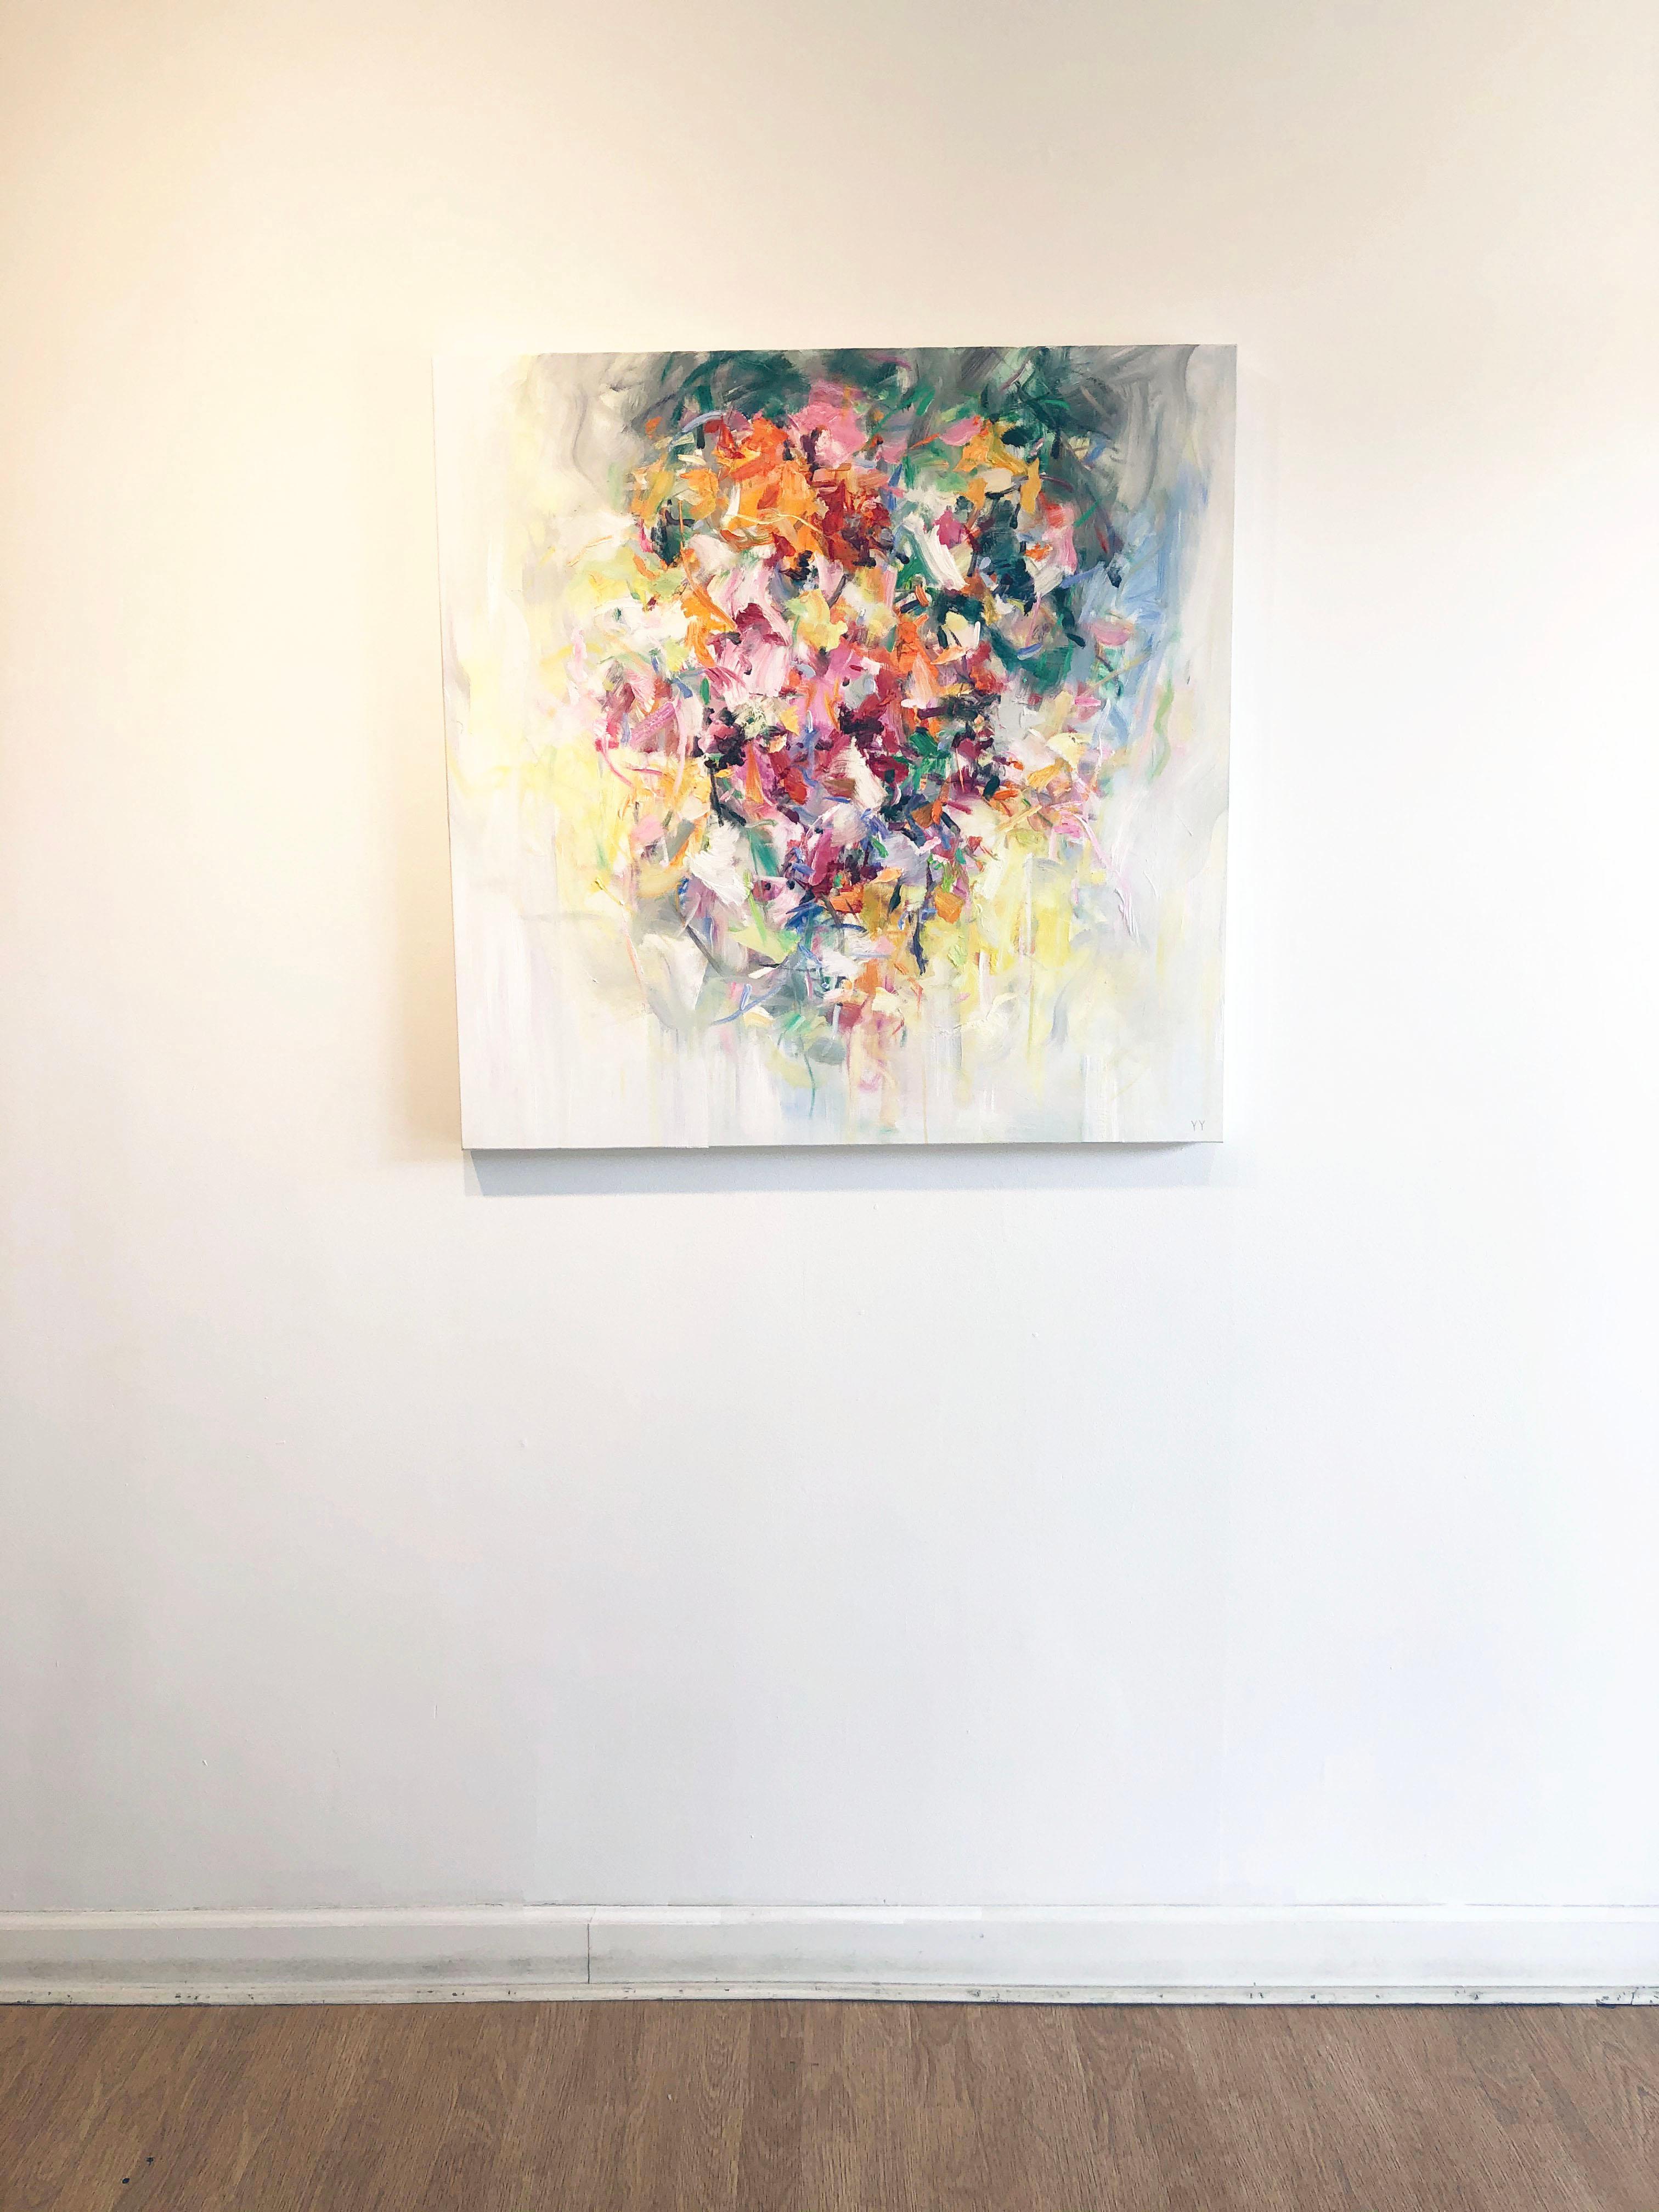 'Flowers on the Wall' 2020 by Chinese/Canadian artist Yangyang Pan. Oil on canvas, 36 x 36 in. This beautiful abstract-impressionistic garden landscape painting incorporates large gestural brush strokes in bold colors of yellow, orange, pink,